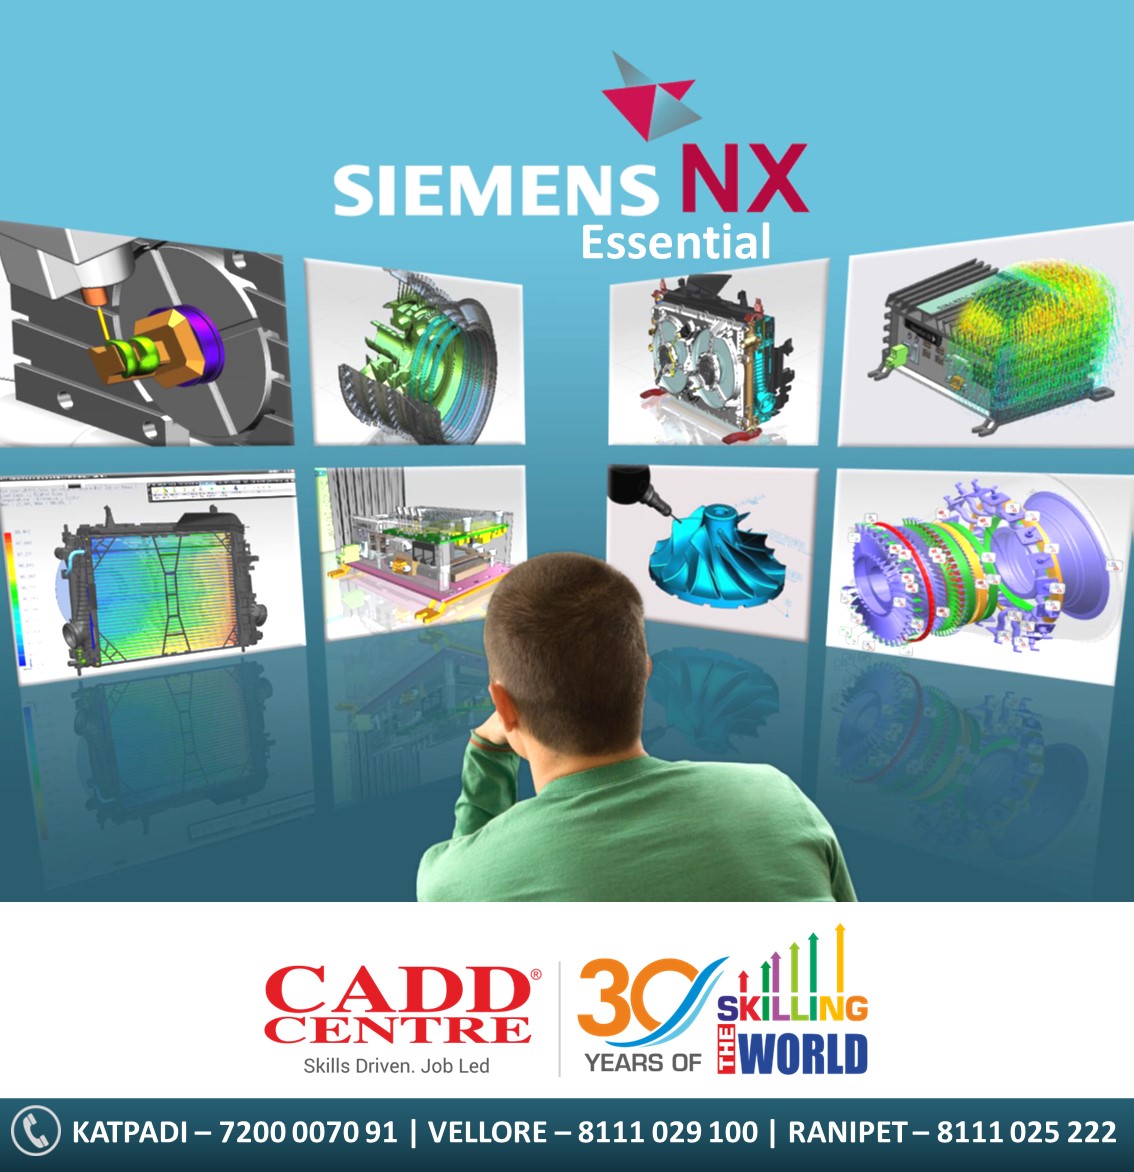 Learn NX SIEMENS to build your Mechanical Design Career!@caddcentrevellore

Register Now!

#caddcentre #caddcentrevellore #livewire #livewireindia #CAD #students #vellore #AutoCAD  #NXCAD #NXSiemens #surfacemodeling #sheetmetaldesign #assemblydesign #partmodeling #Ranipet